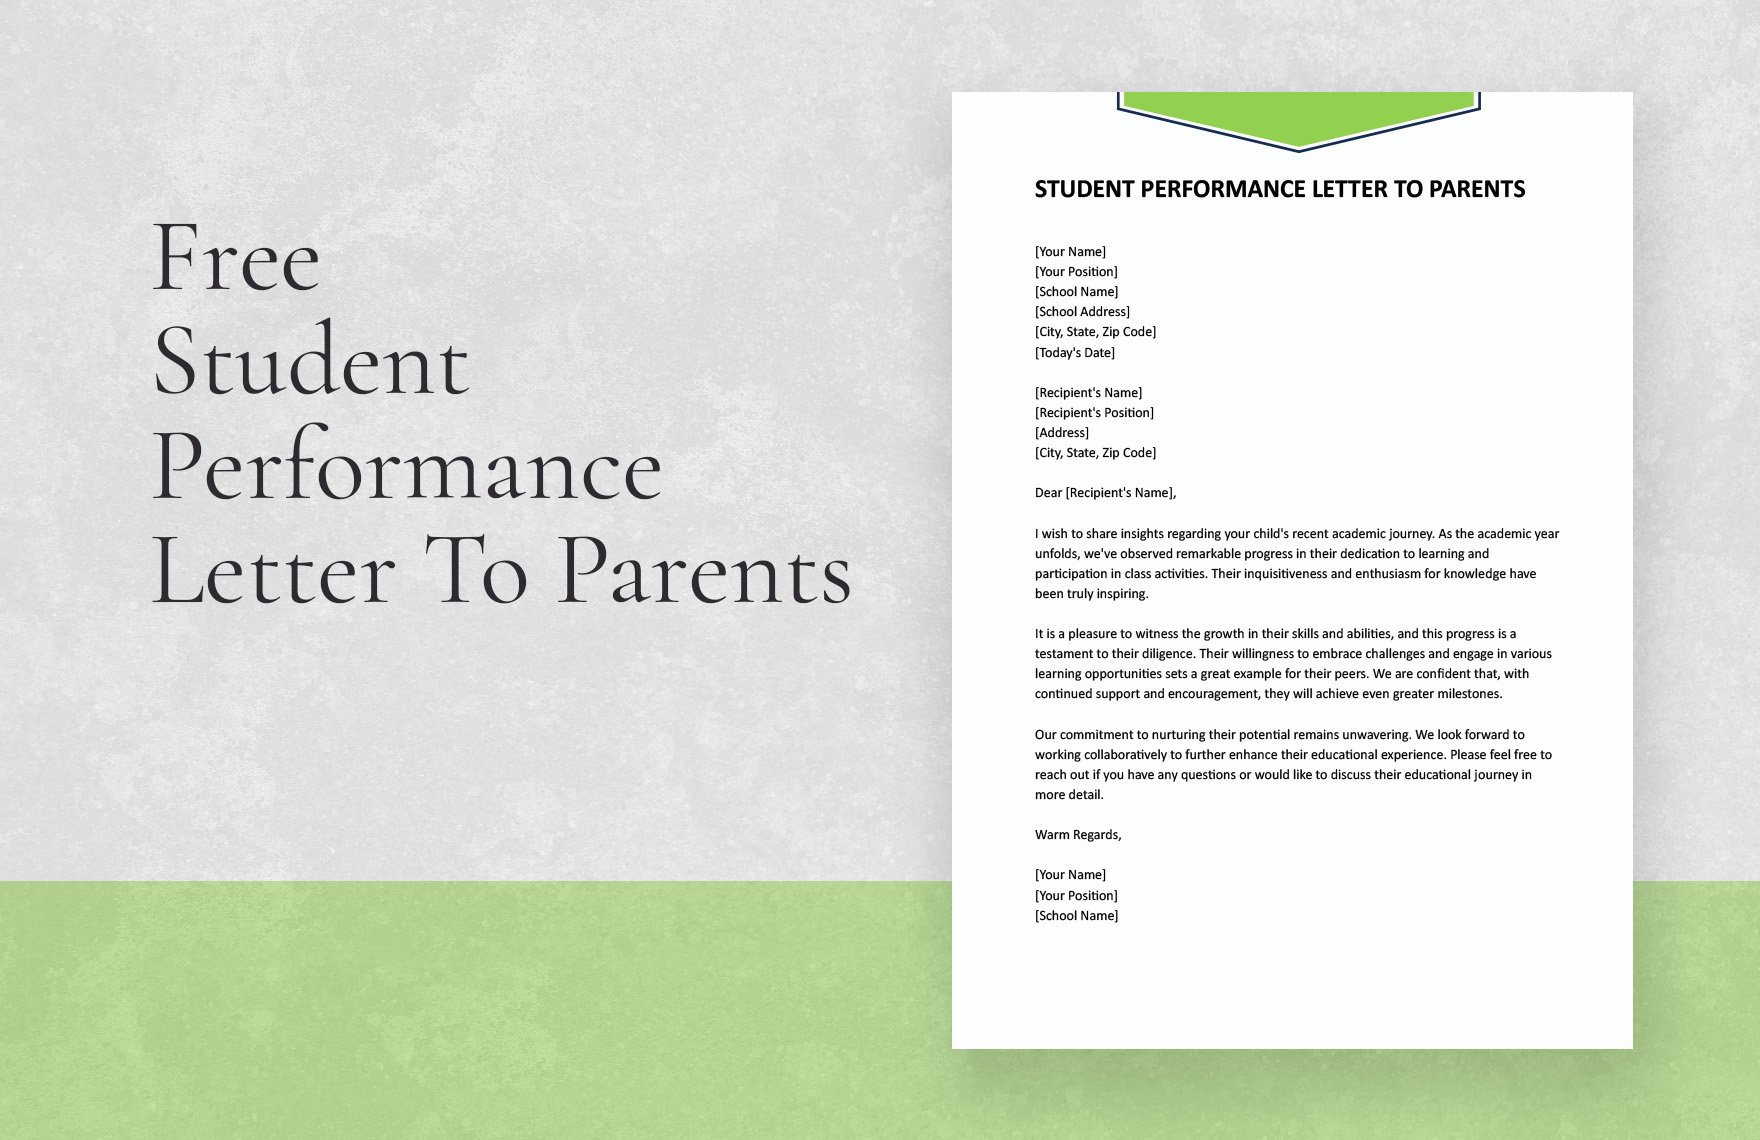 Student Performance Letter To Parents in Word, Google Docs